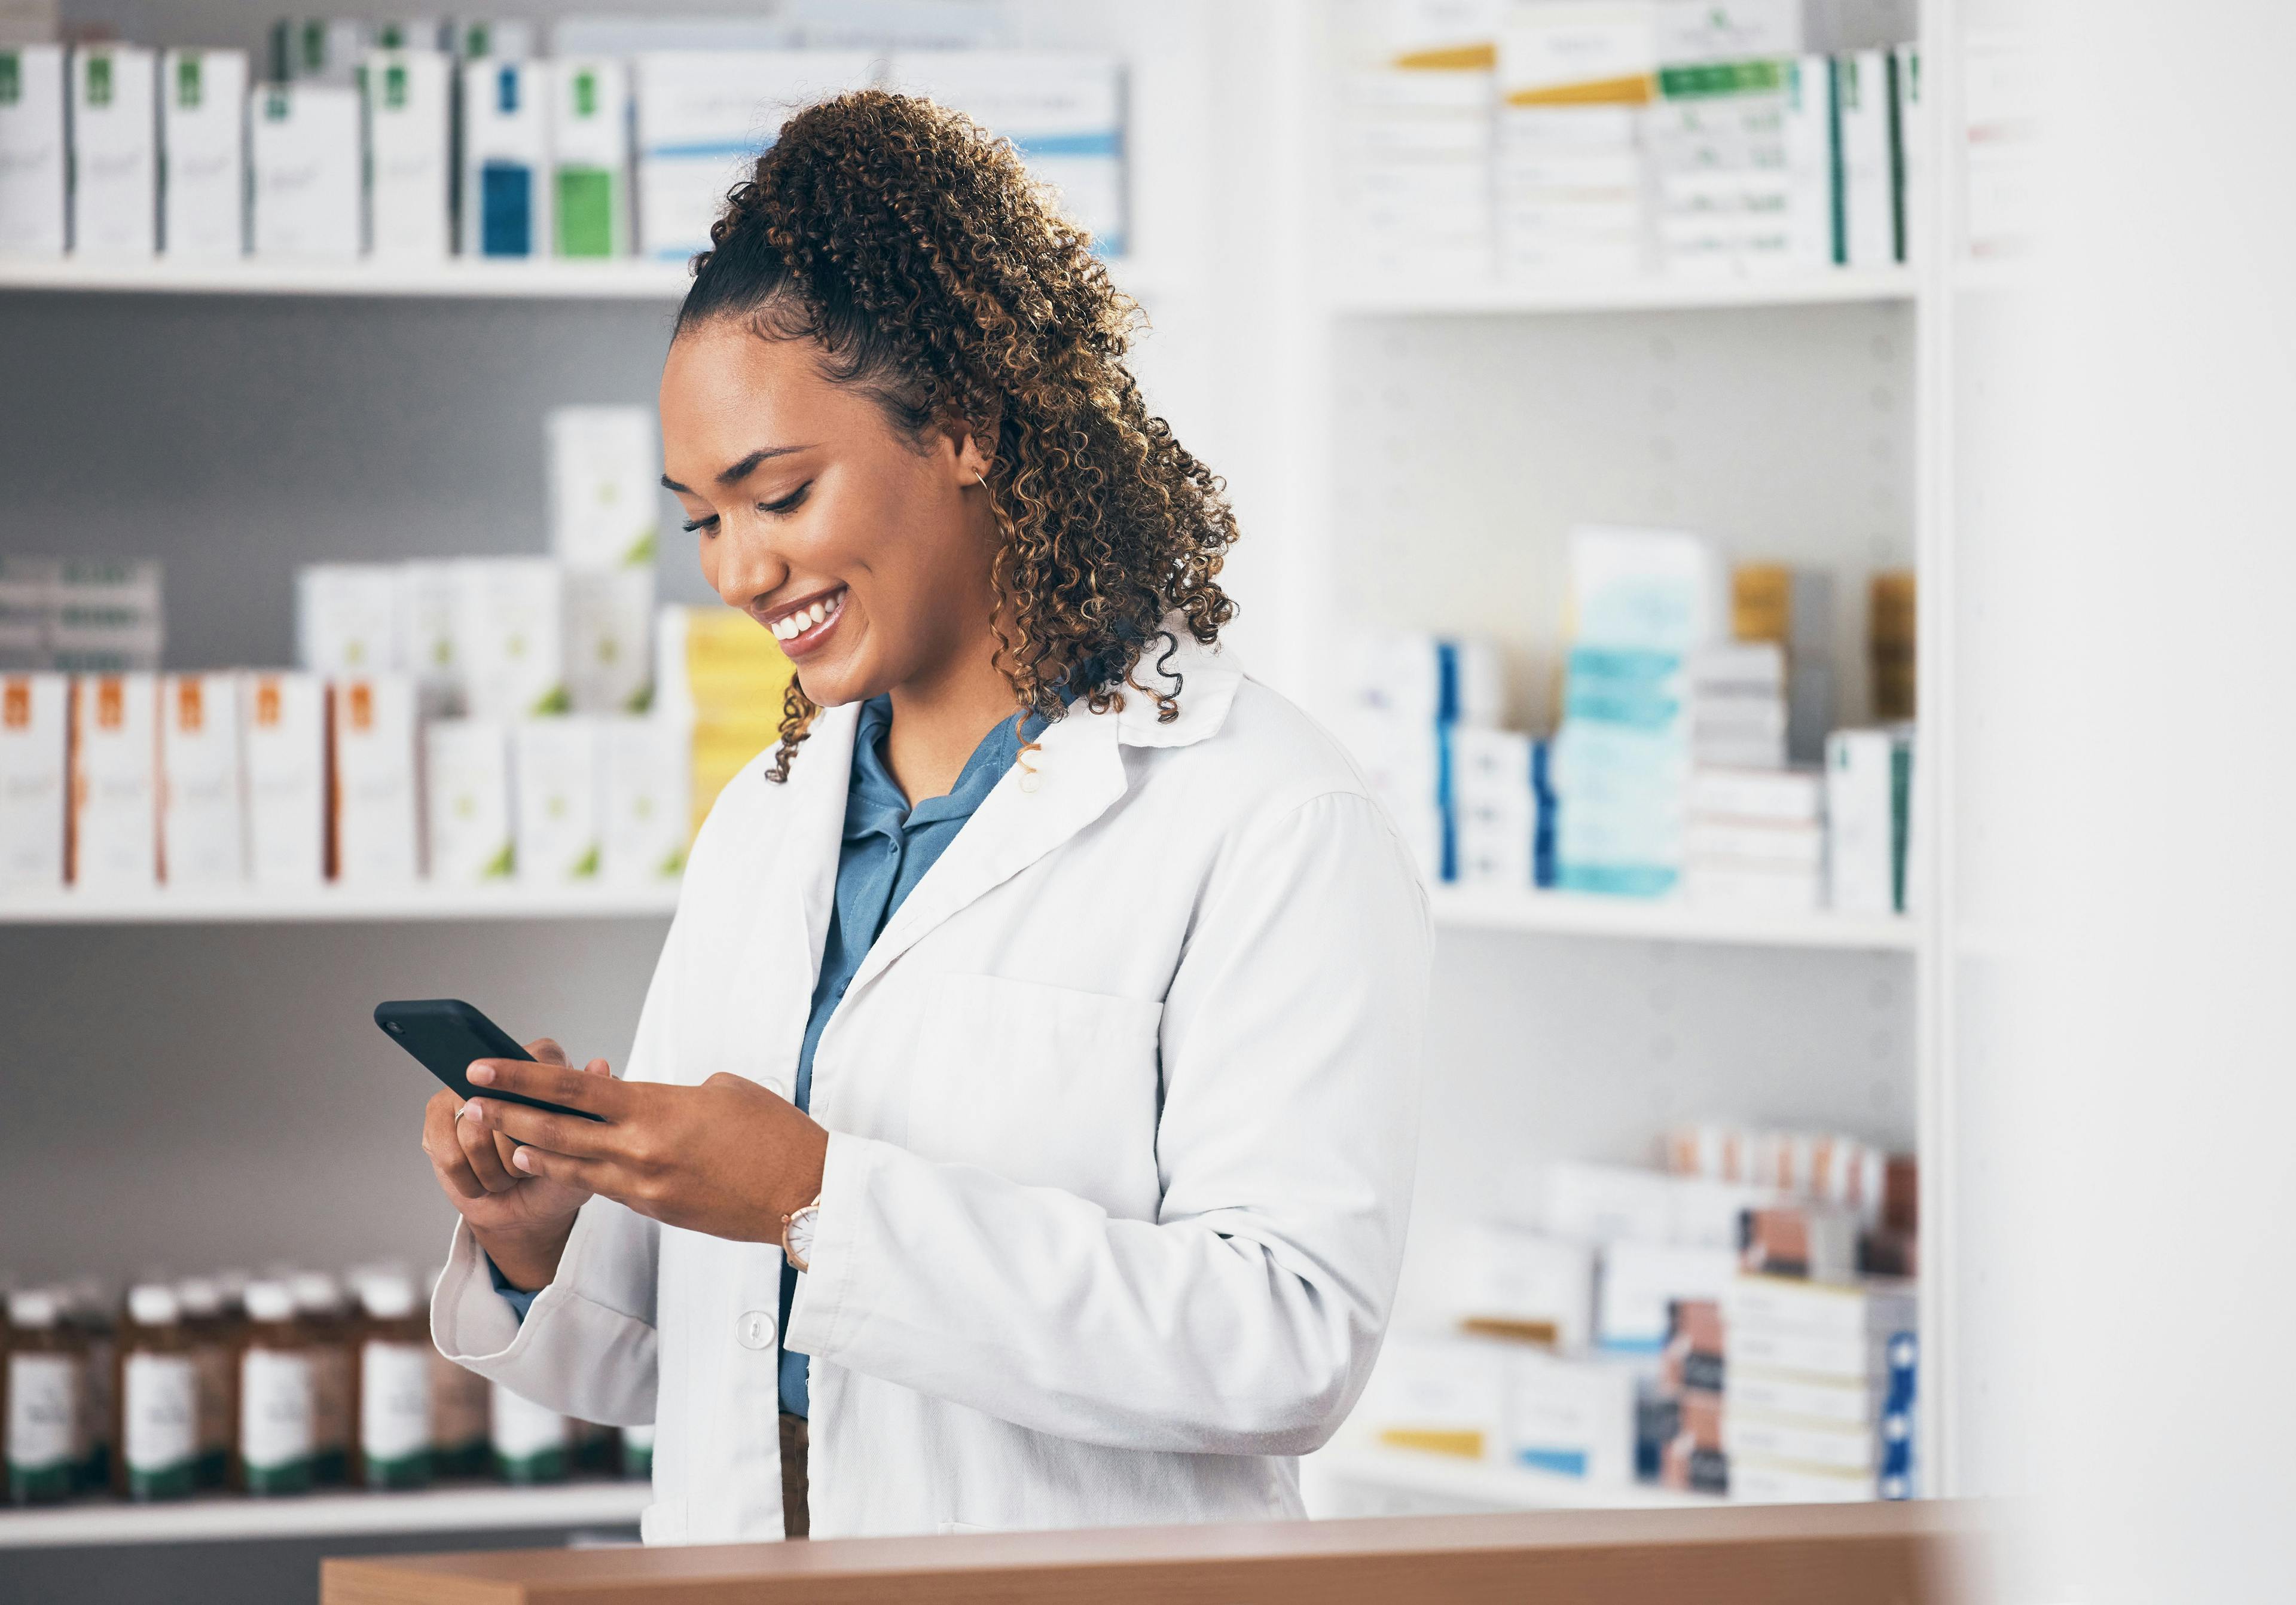 Pharmacist texting in pharmacy to contact, email communication or reading chat with patient. | Image Credit: Rene La/peopleimages.com - stock.adobe.com